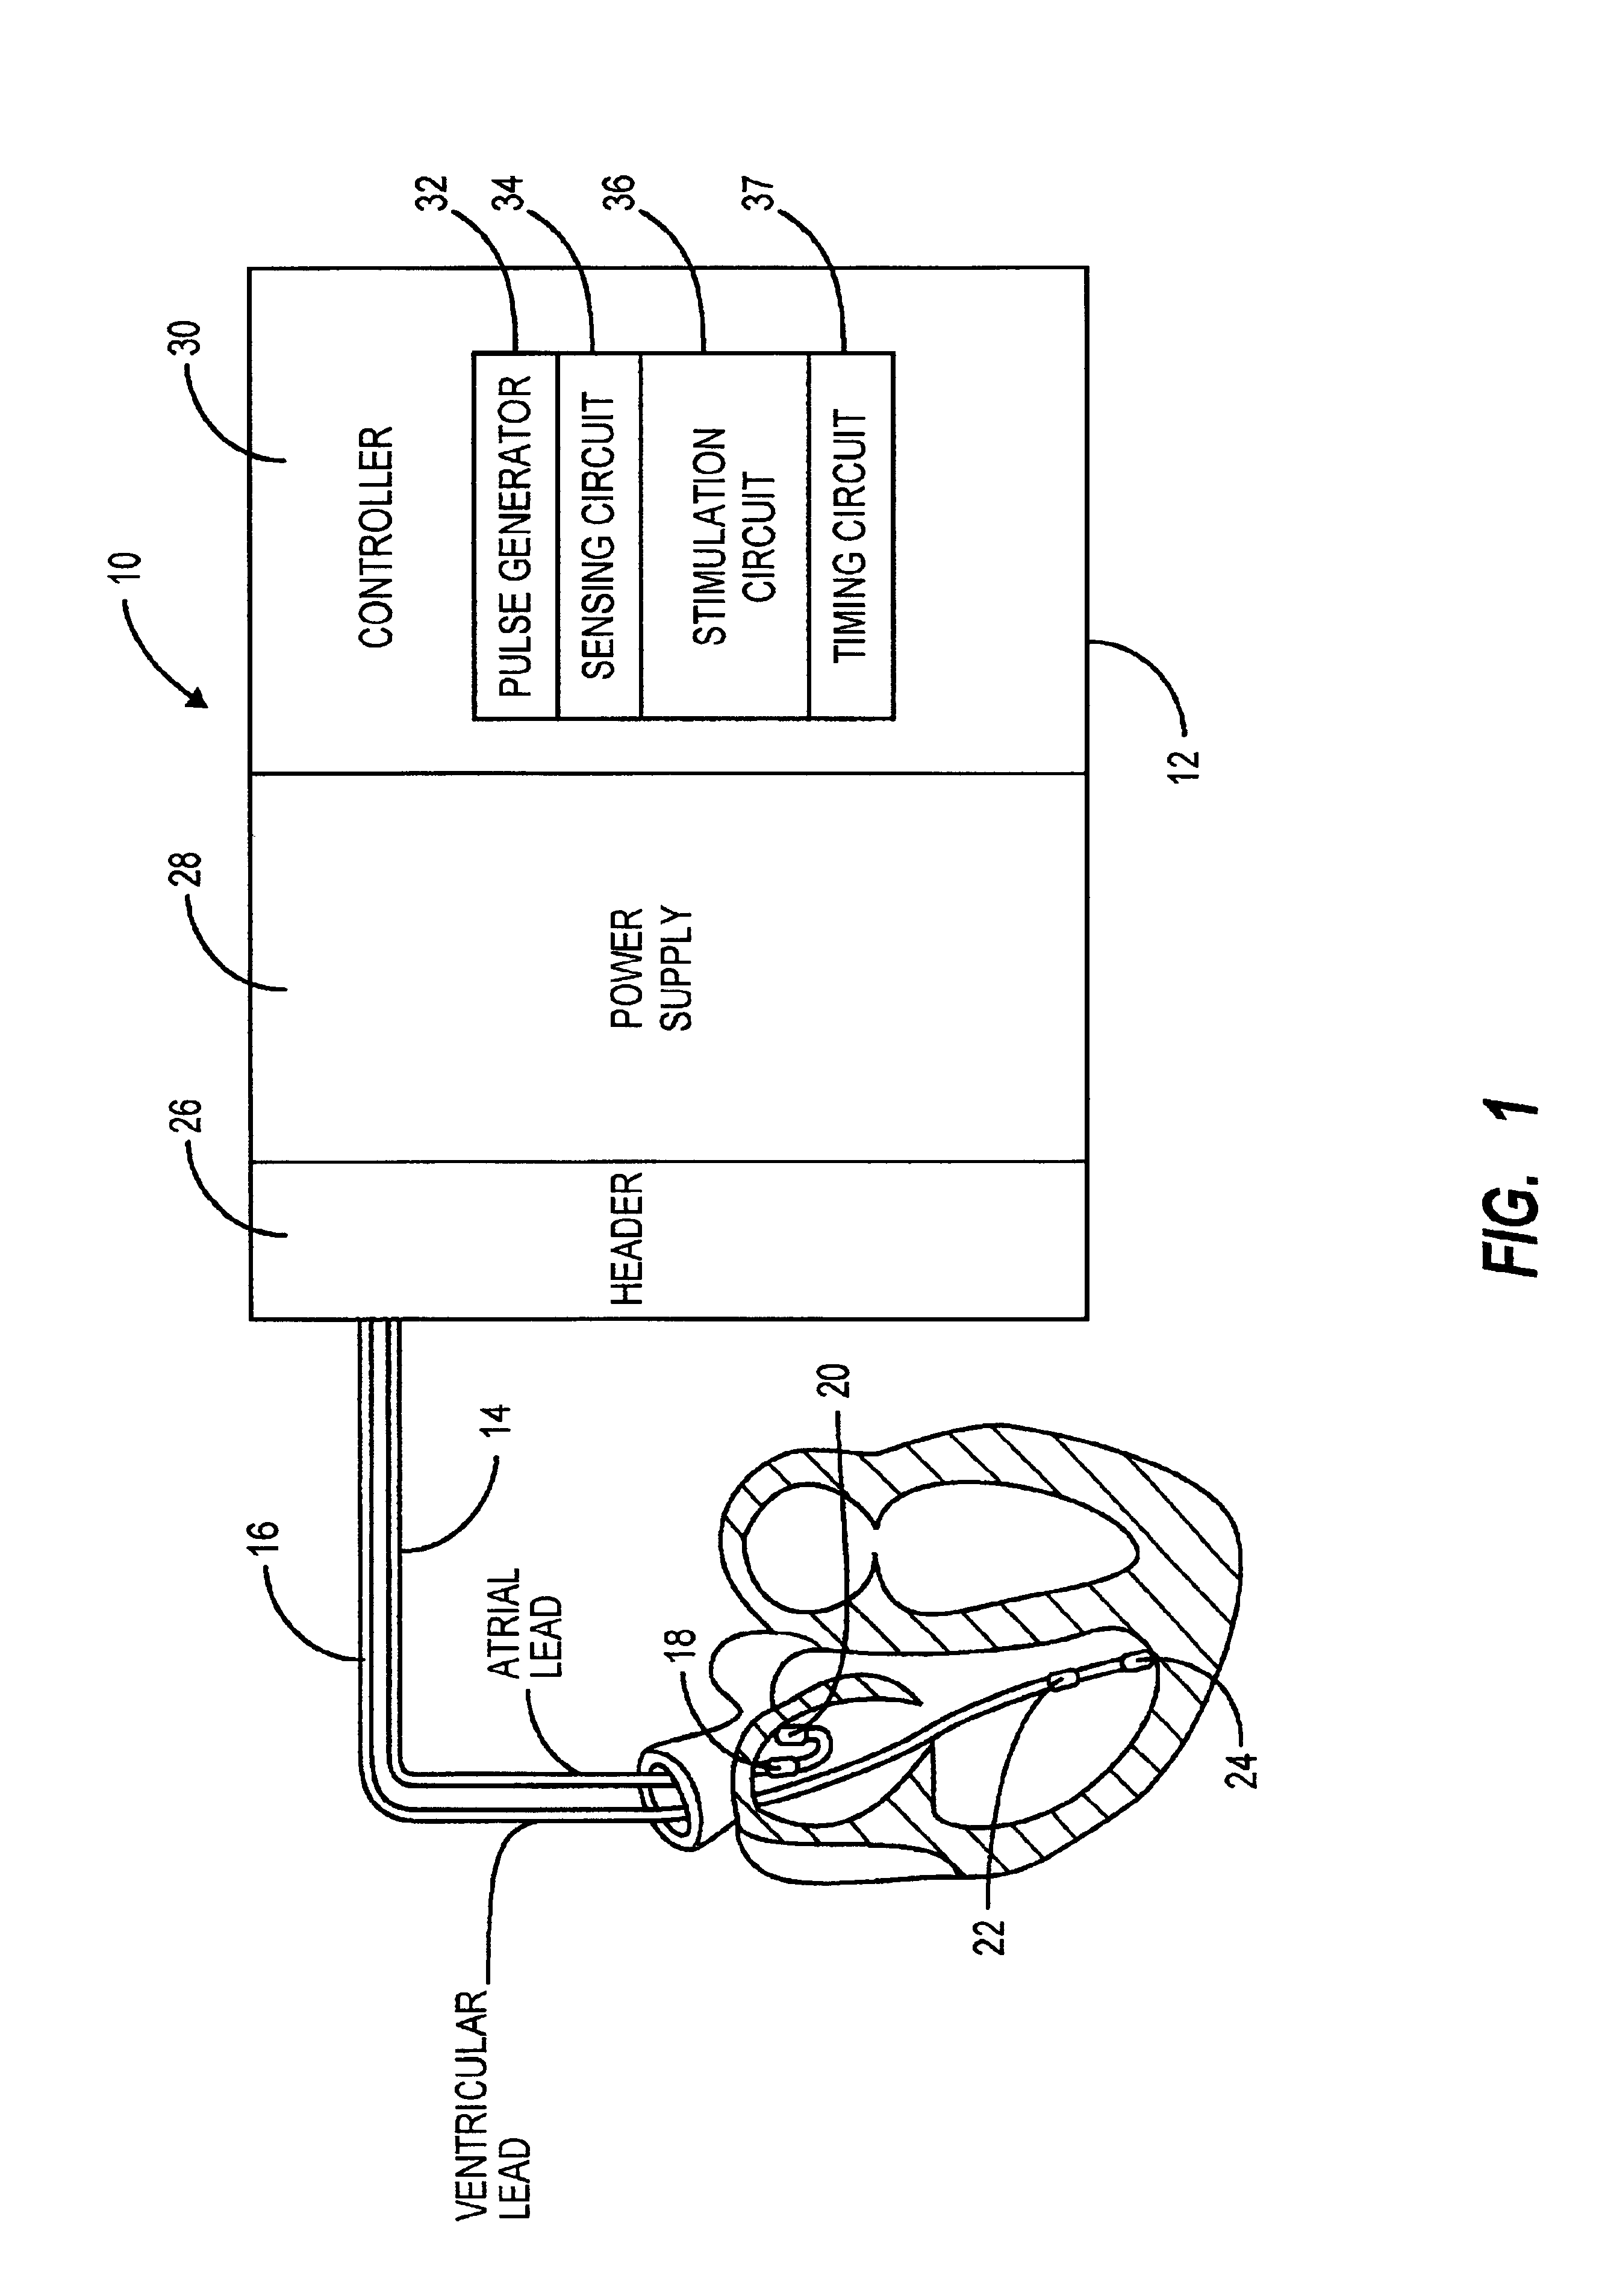 Method and apparatus for avoiding unwanted sensing in a cardiac rhythm management device